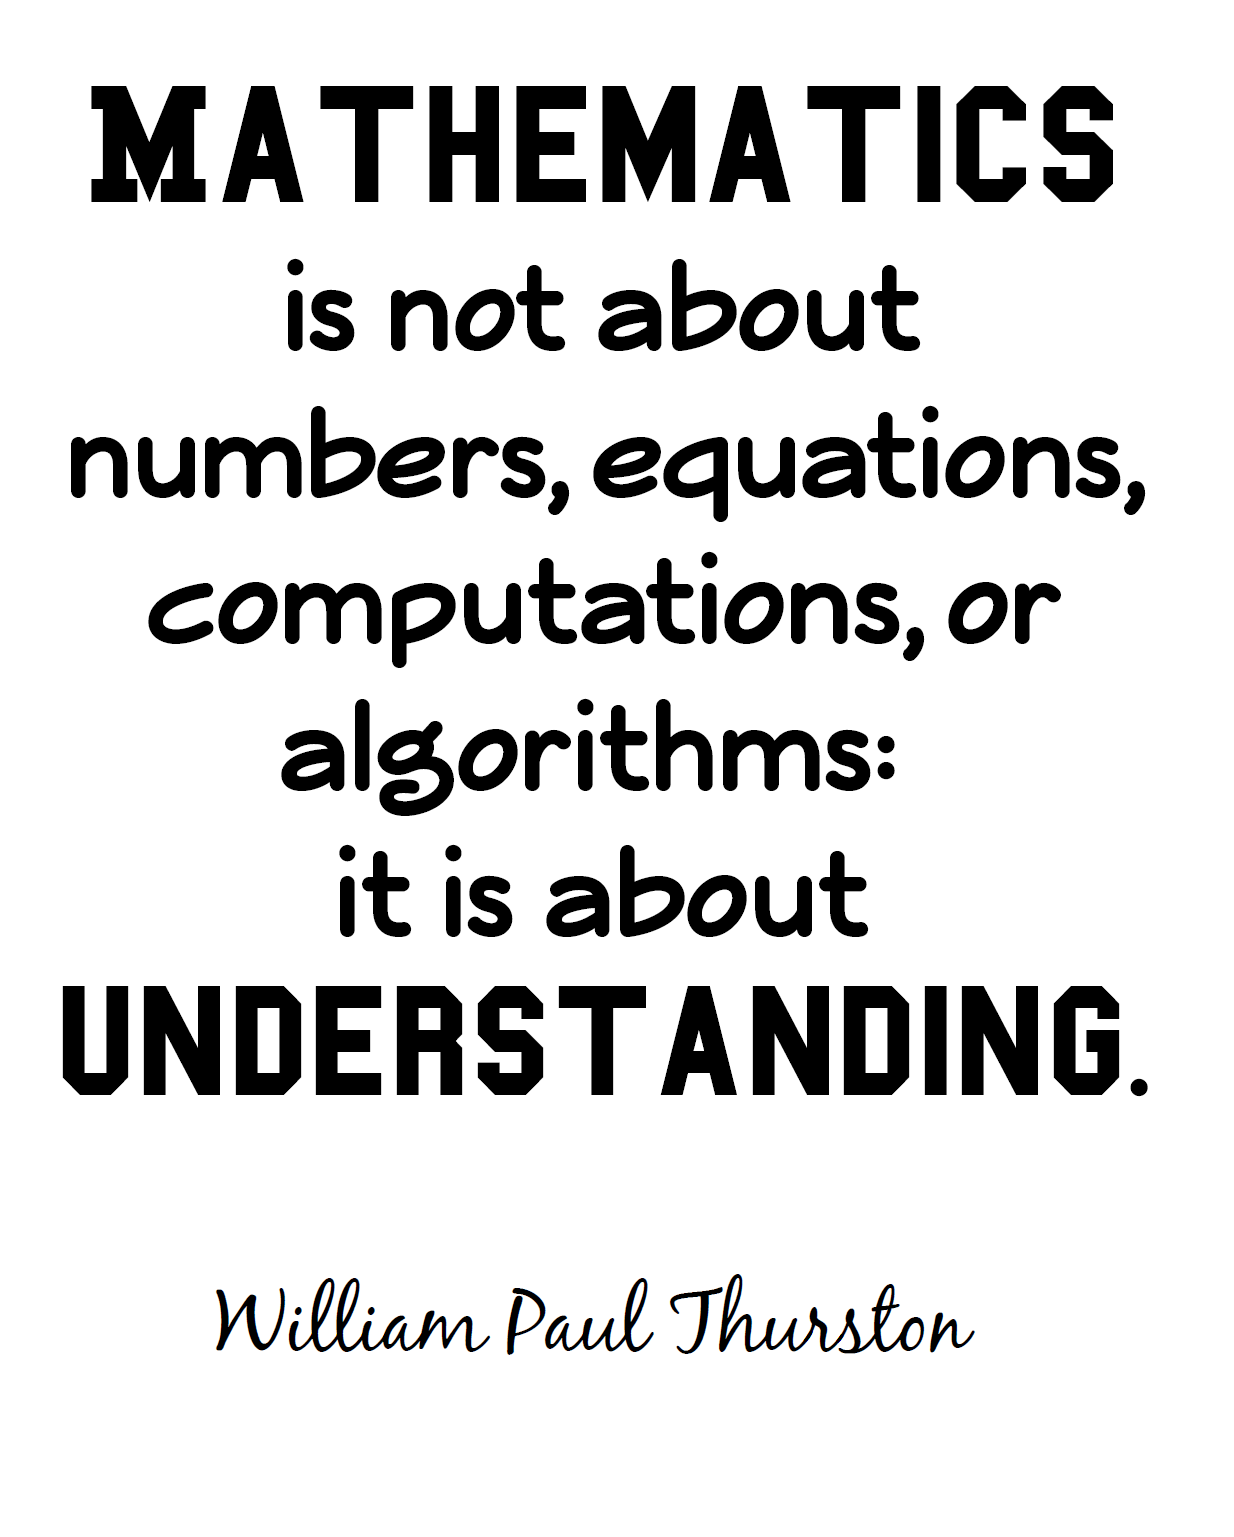 Math Quote Poster - Mathematics is not about numbers, equations, computations, or algorithms: it is about understanding.  - William Paul Thurston